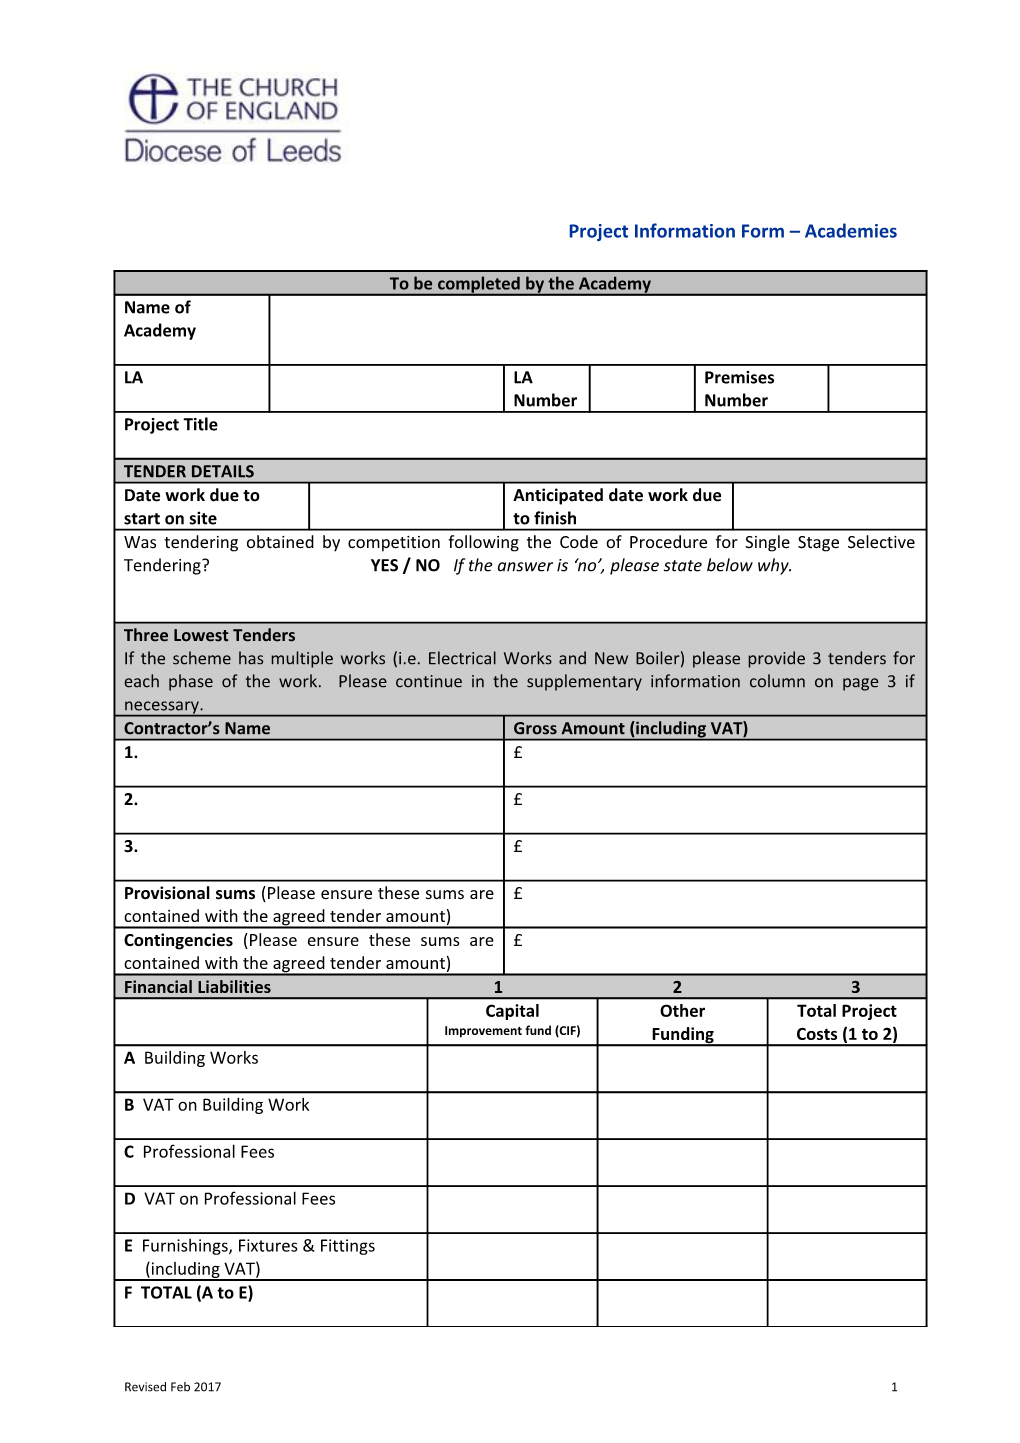 Project Information Form Academies